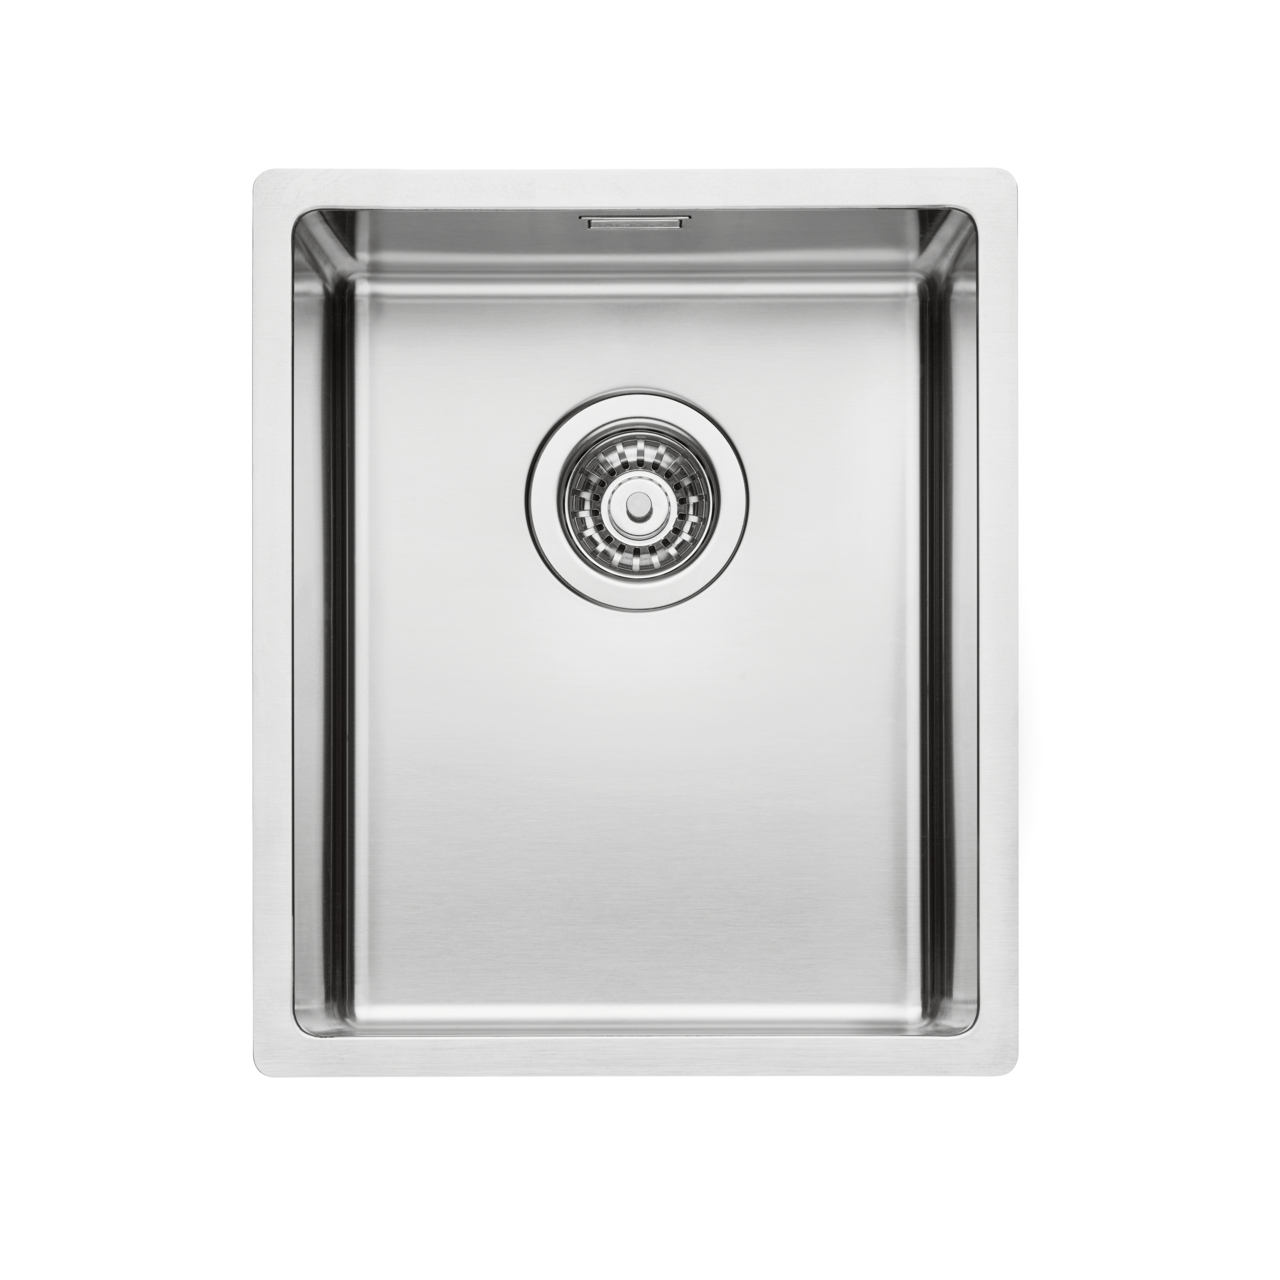 Corno Basso 2, set (sink and Arco 1 faucet)